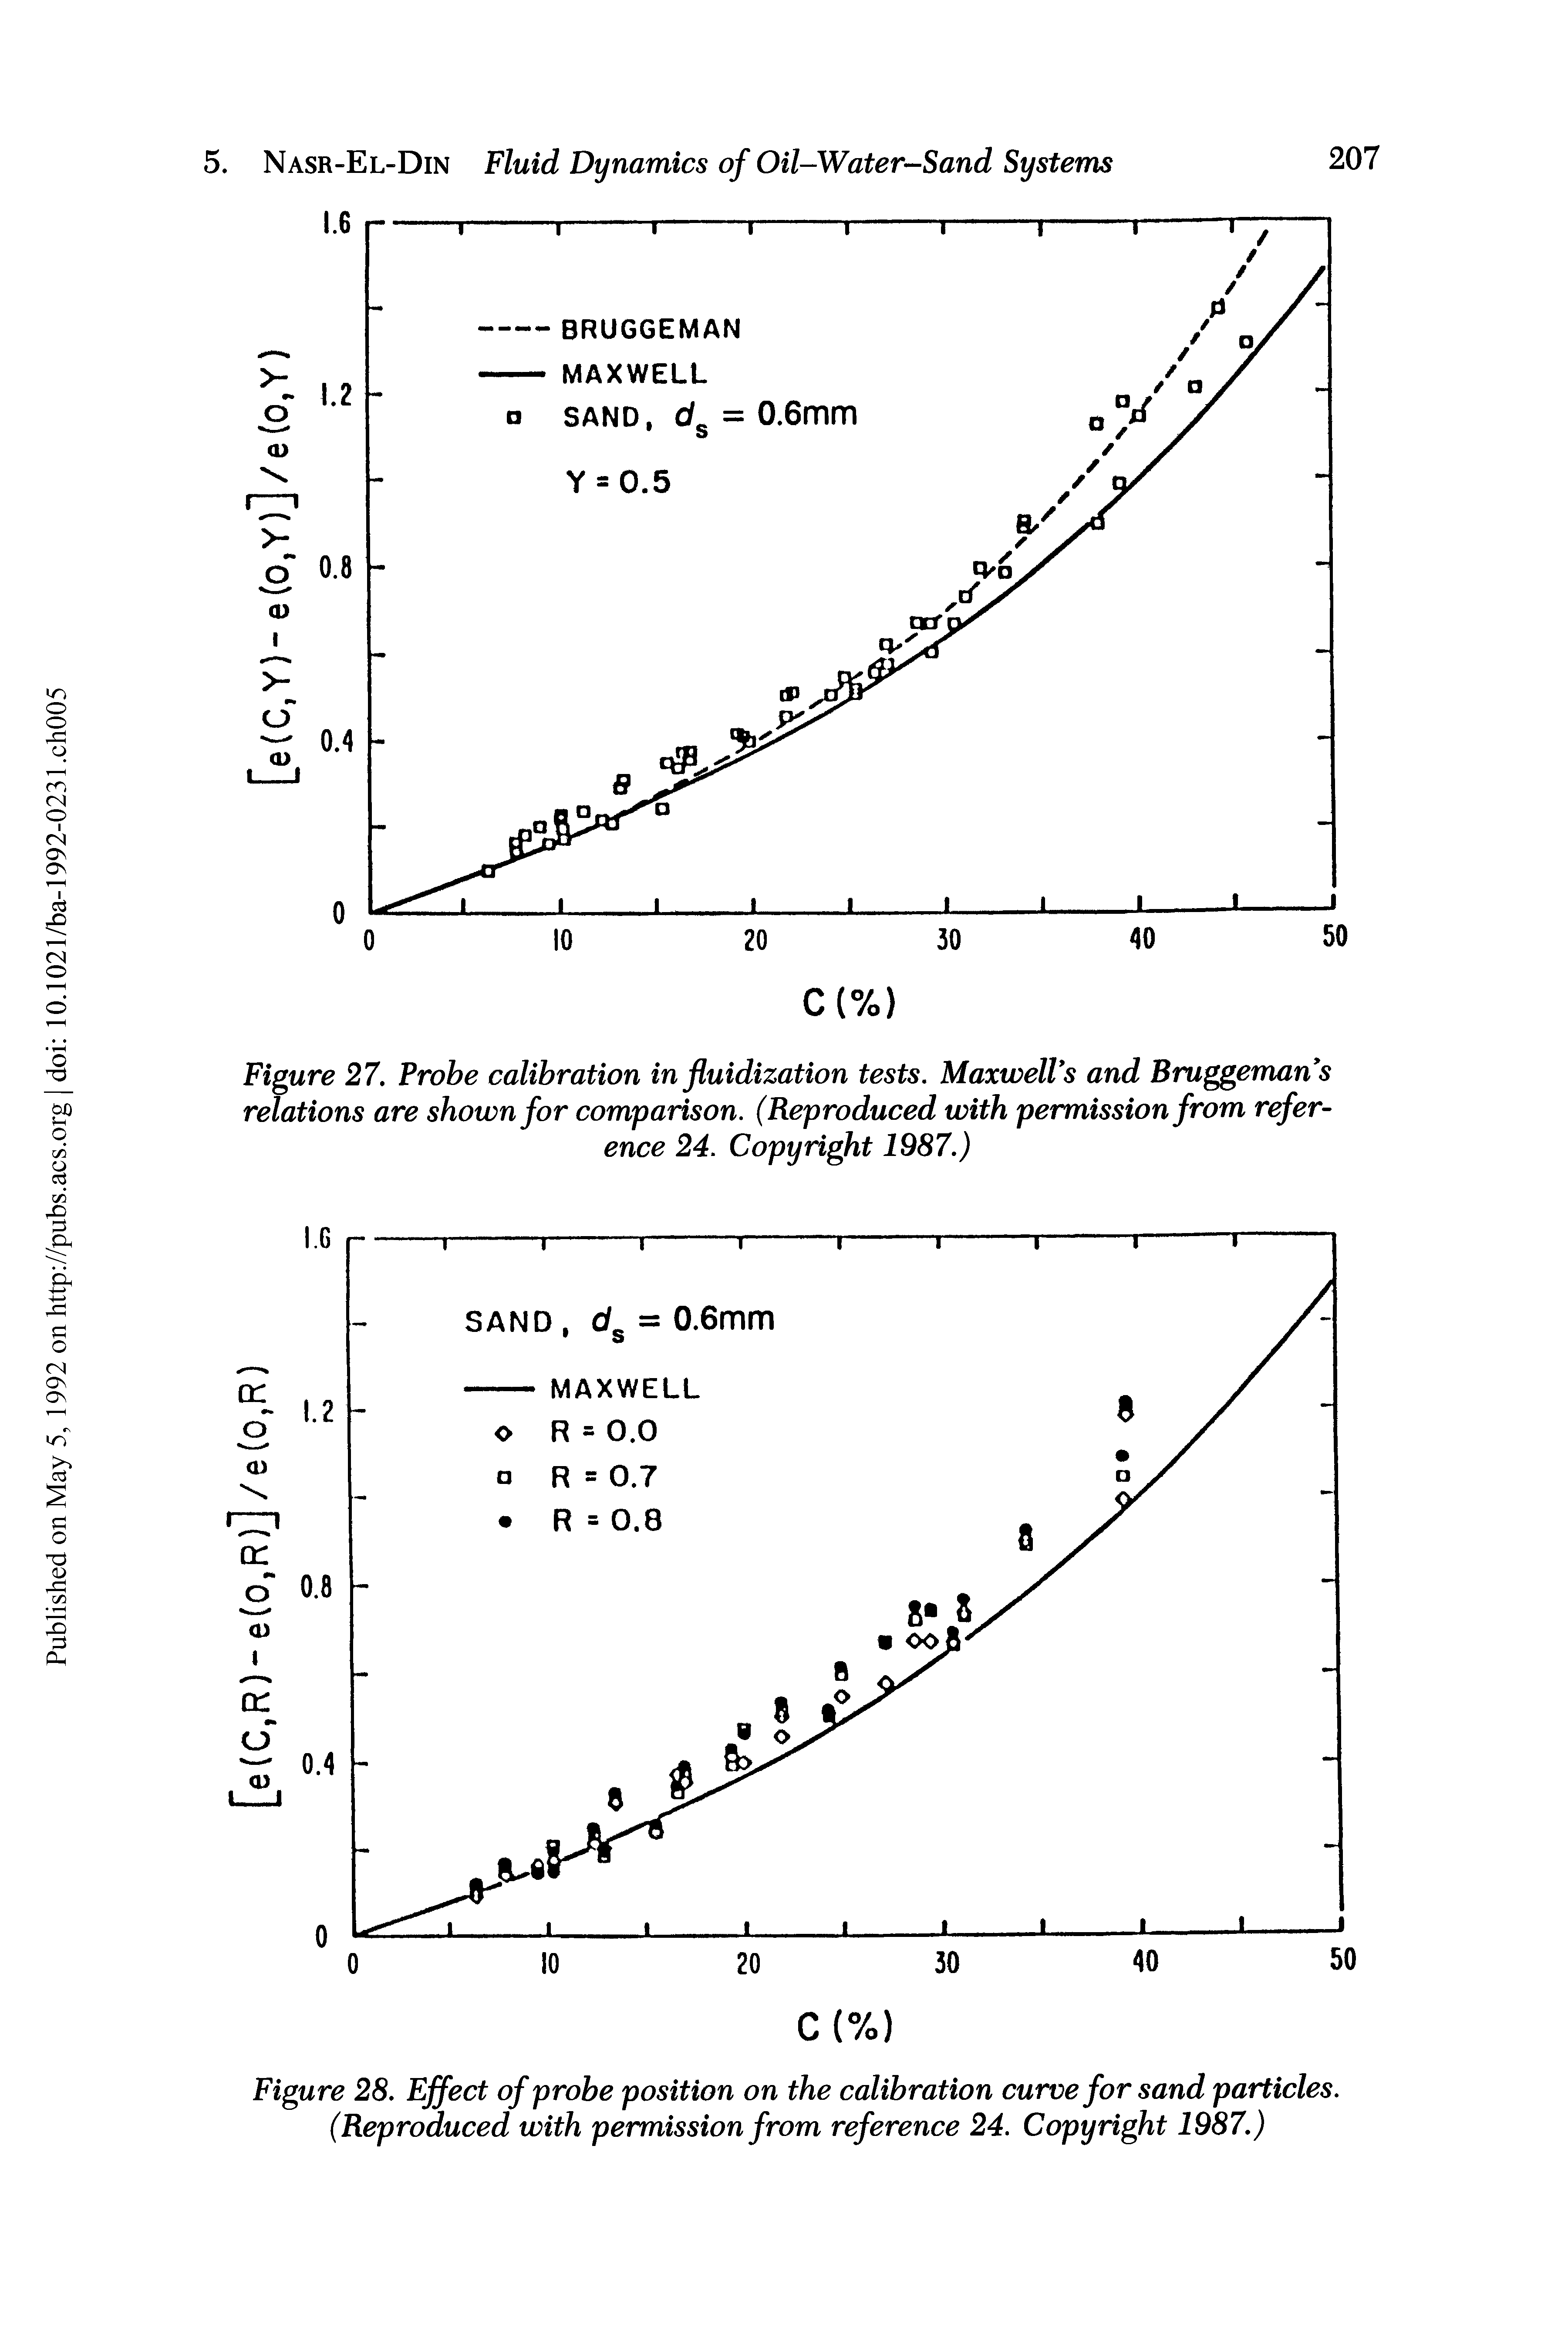 Figure 28. Effect of probe position on the calibration curve for sand particles. (Reproduced with permission from reference 24. Copyright 1987.)...